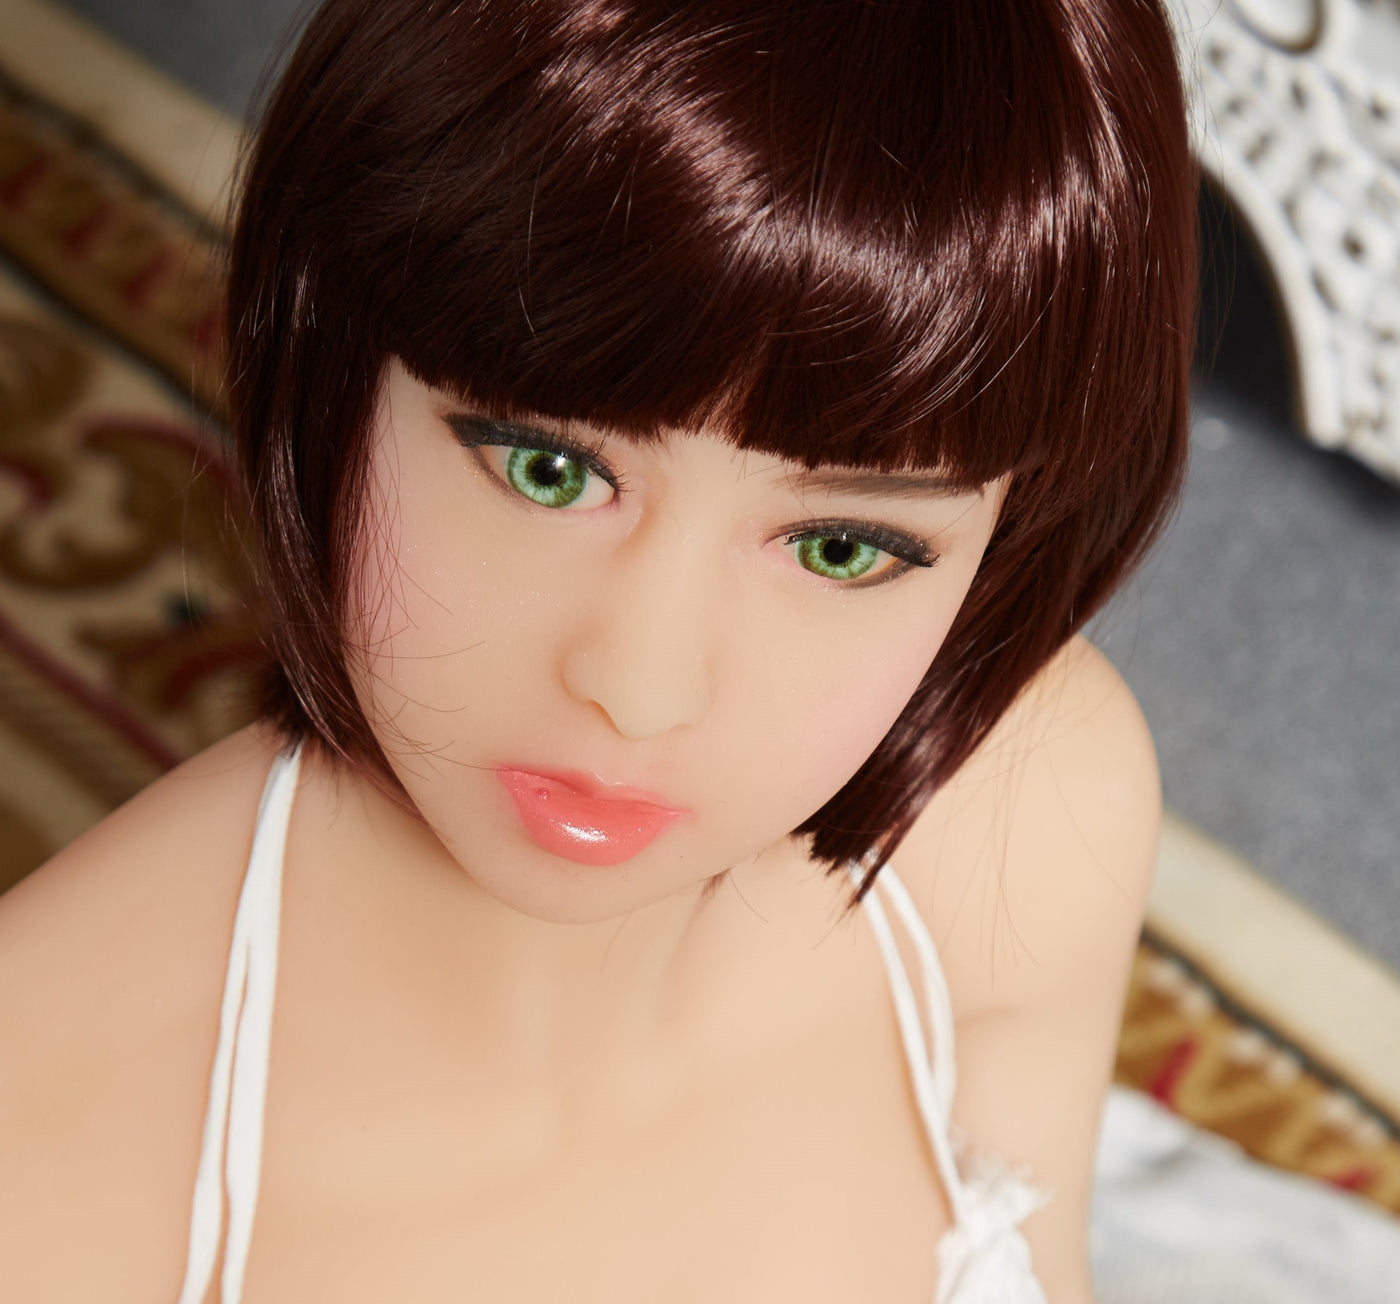 Neodoll Allure Nora - Sex Doll Doll - M16 Compatible - Natural